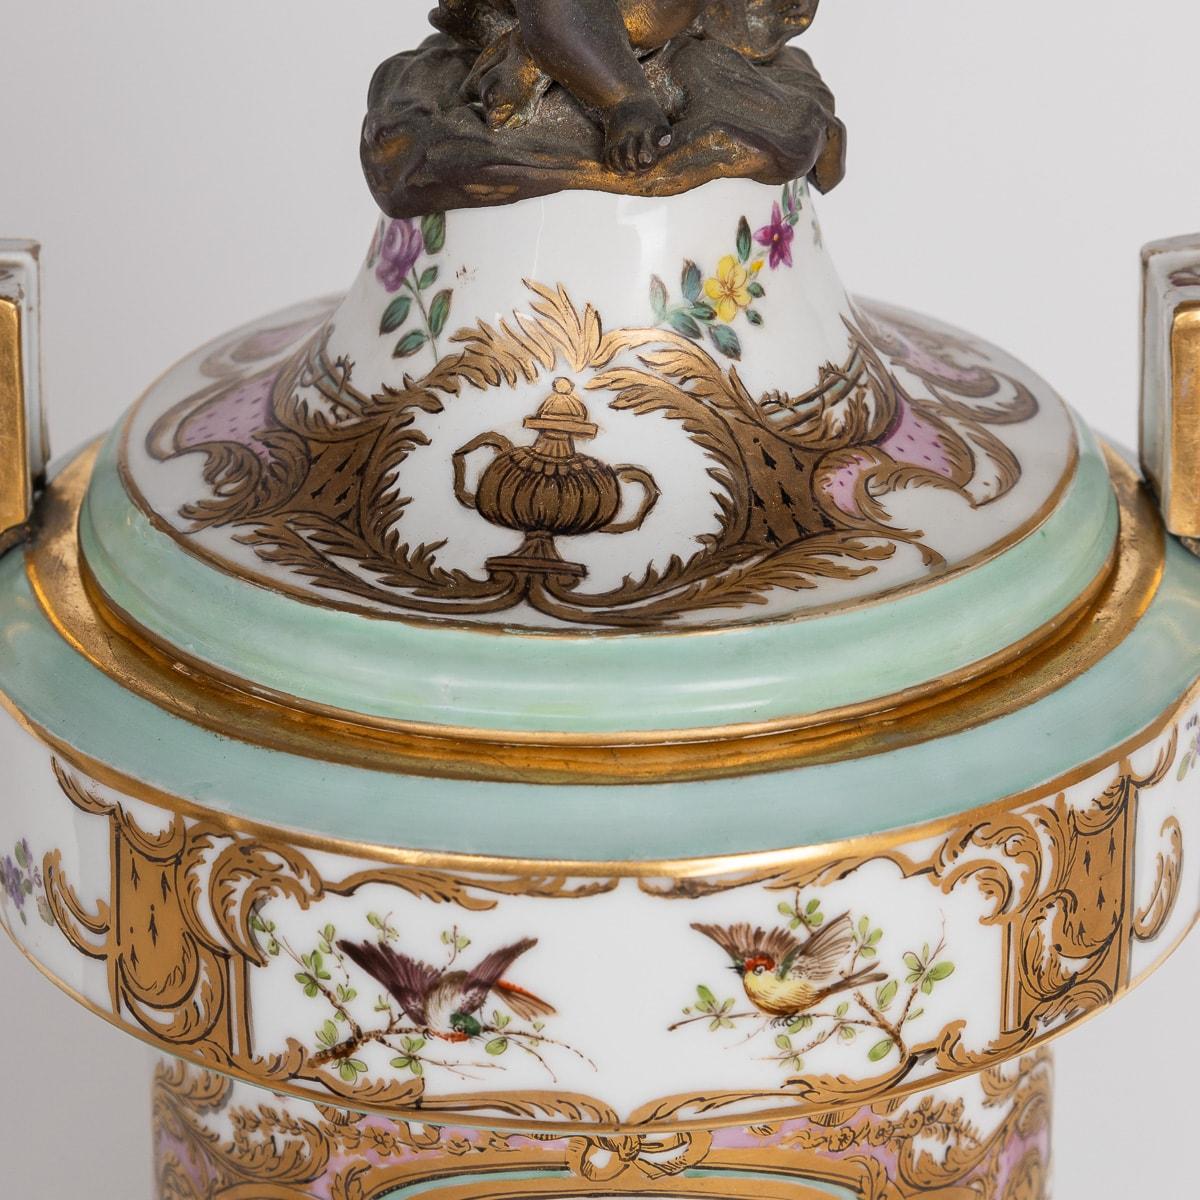 Antique 19th Century Samson Porcelain & Ormolu Mounted Vases With Cover c.1870 For Sale 3